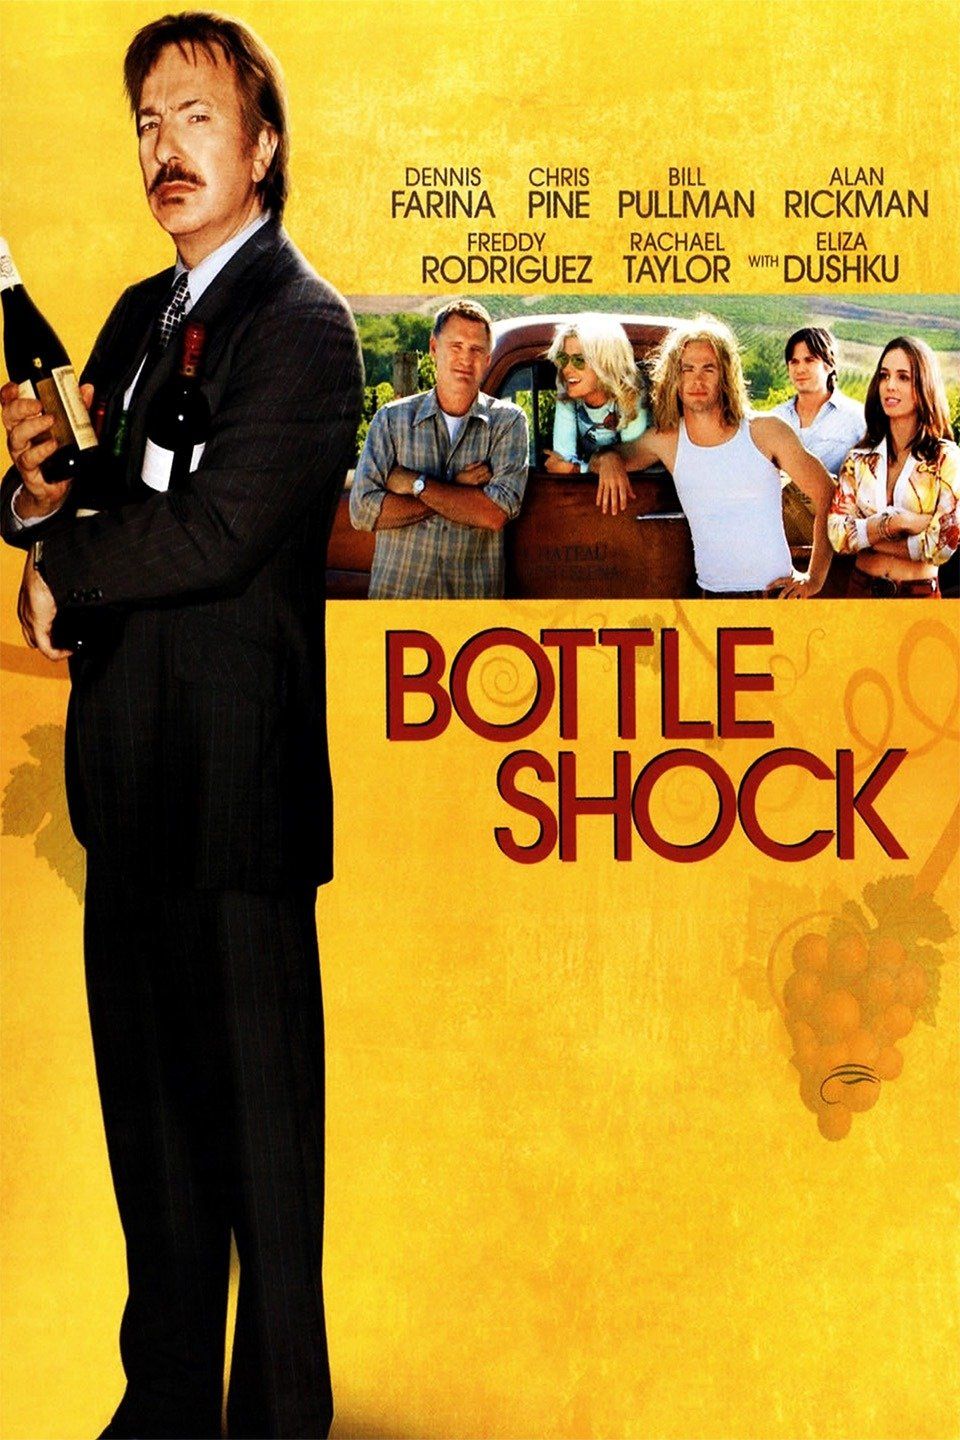 BOTTLE SHOCK” (2008) Review – Claudia's Journal